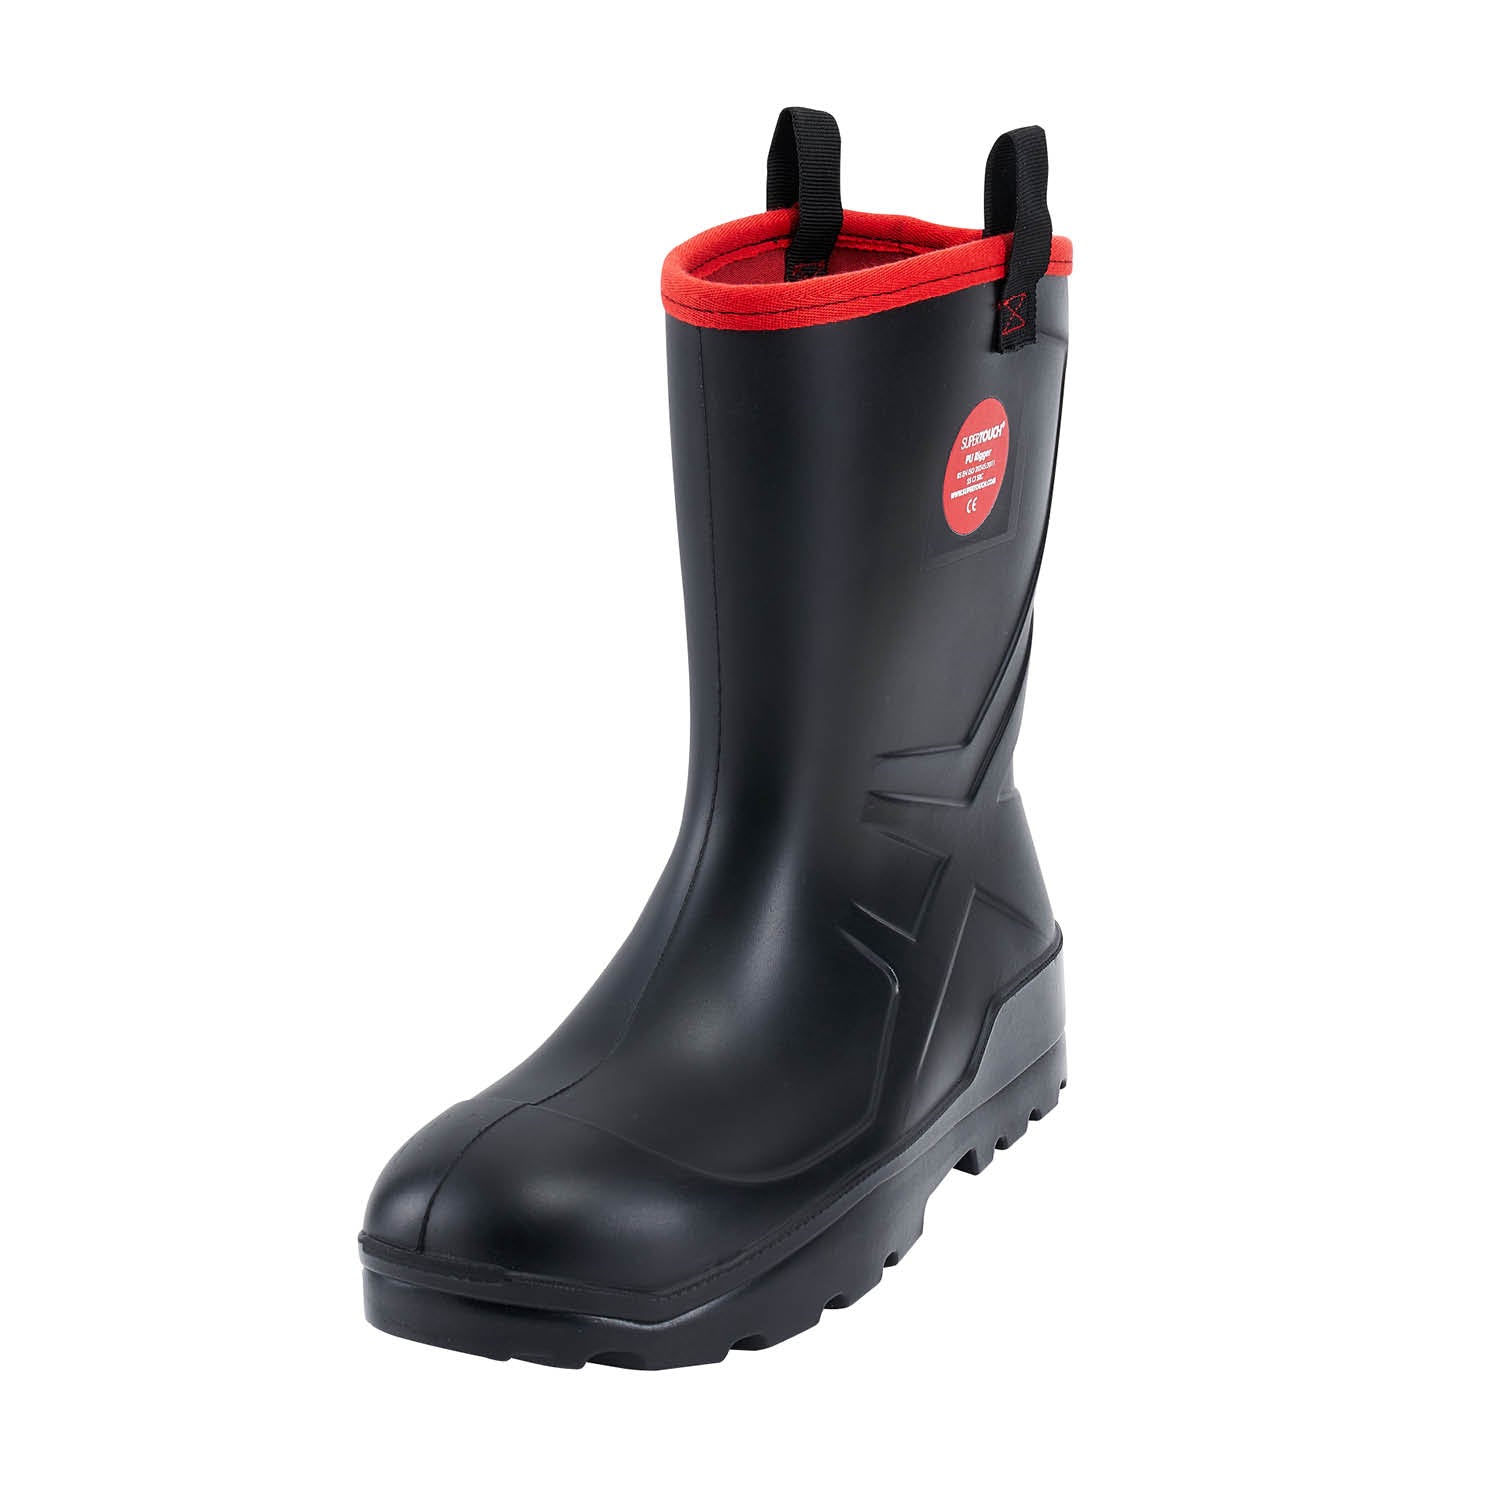 Supertouch PU Rigger Steel Toe Safety Wellington - F101